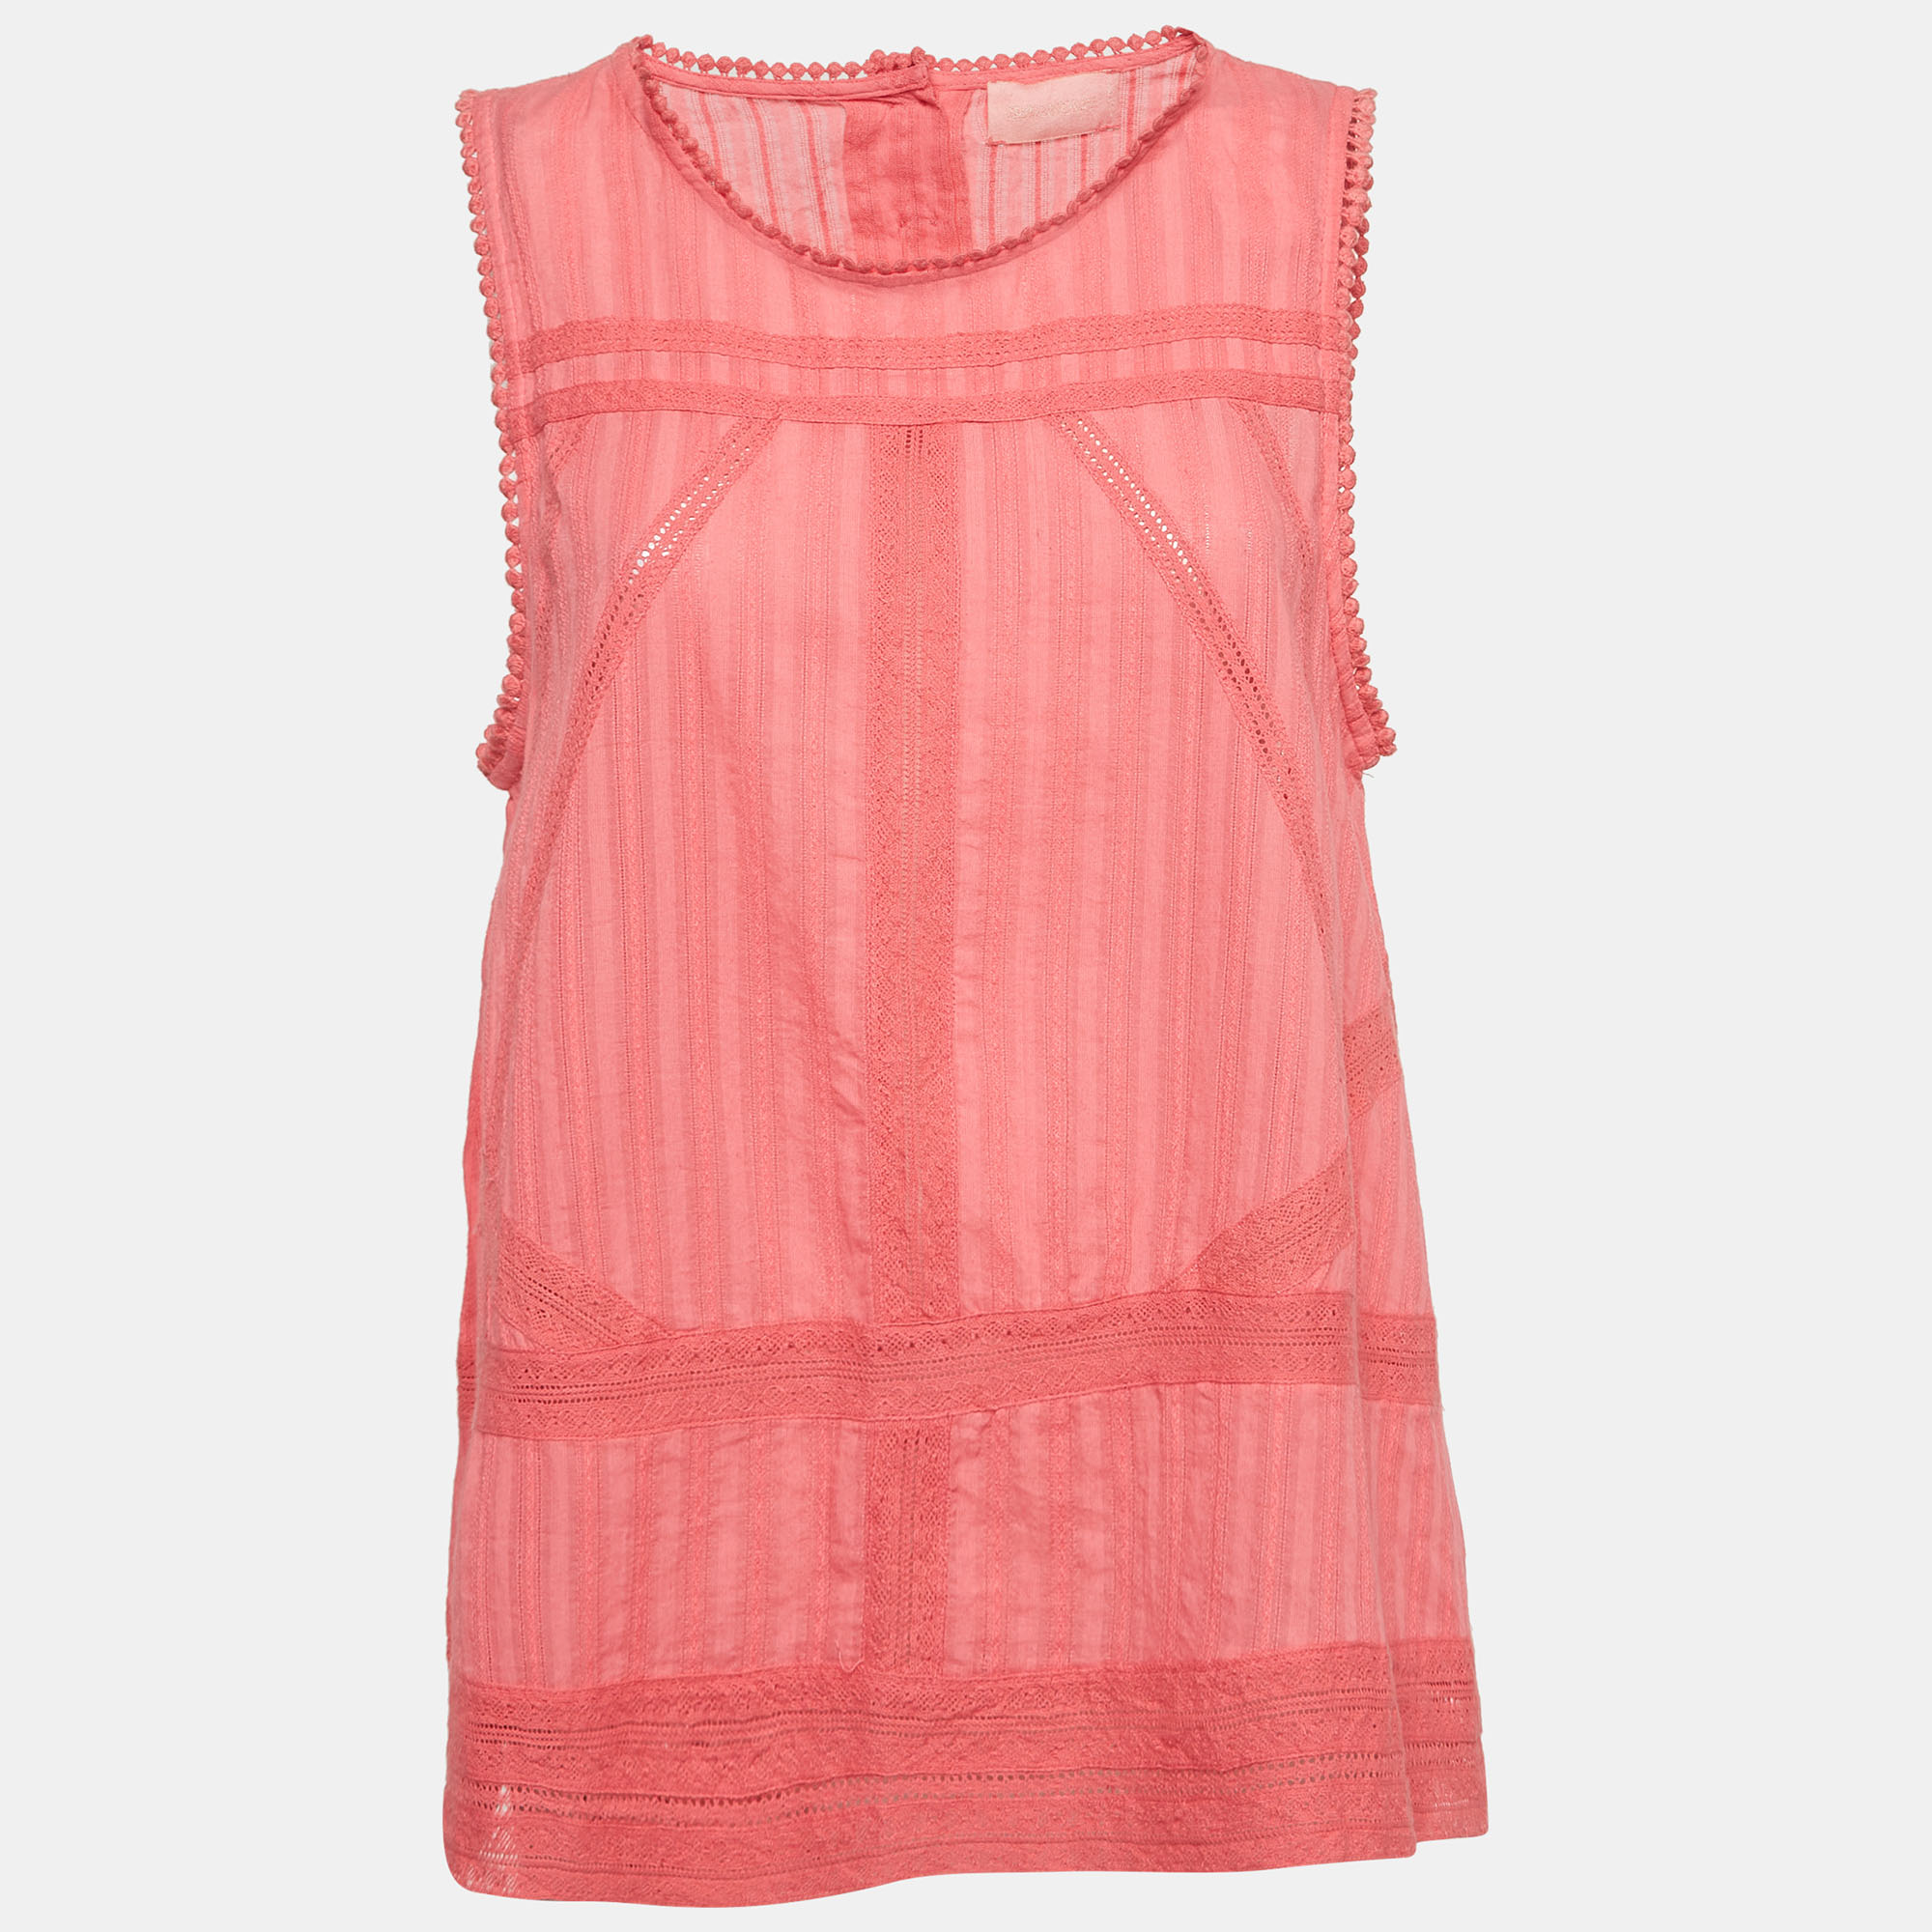 Pre-owned Zadig & Voltaire Pink Lace Trim Cotton Sleeveless Blouse L